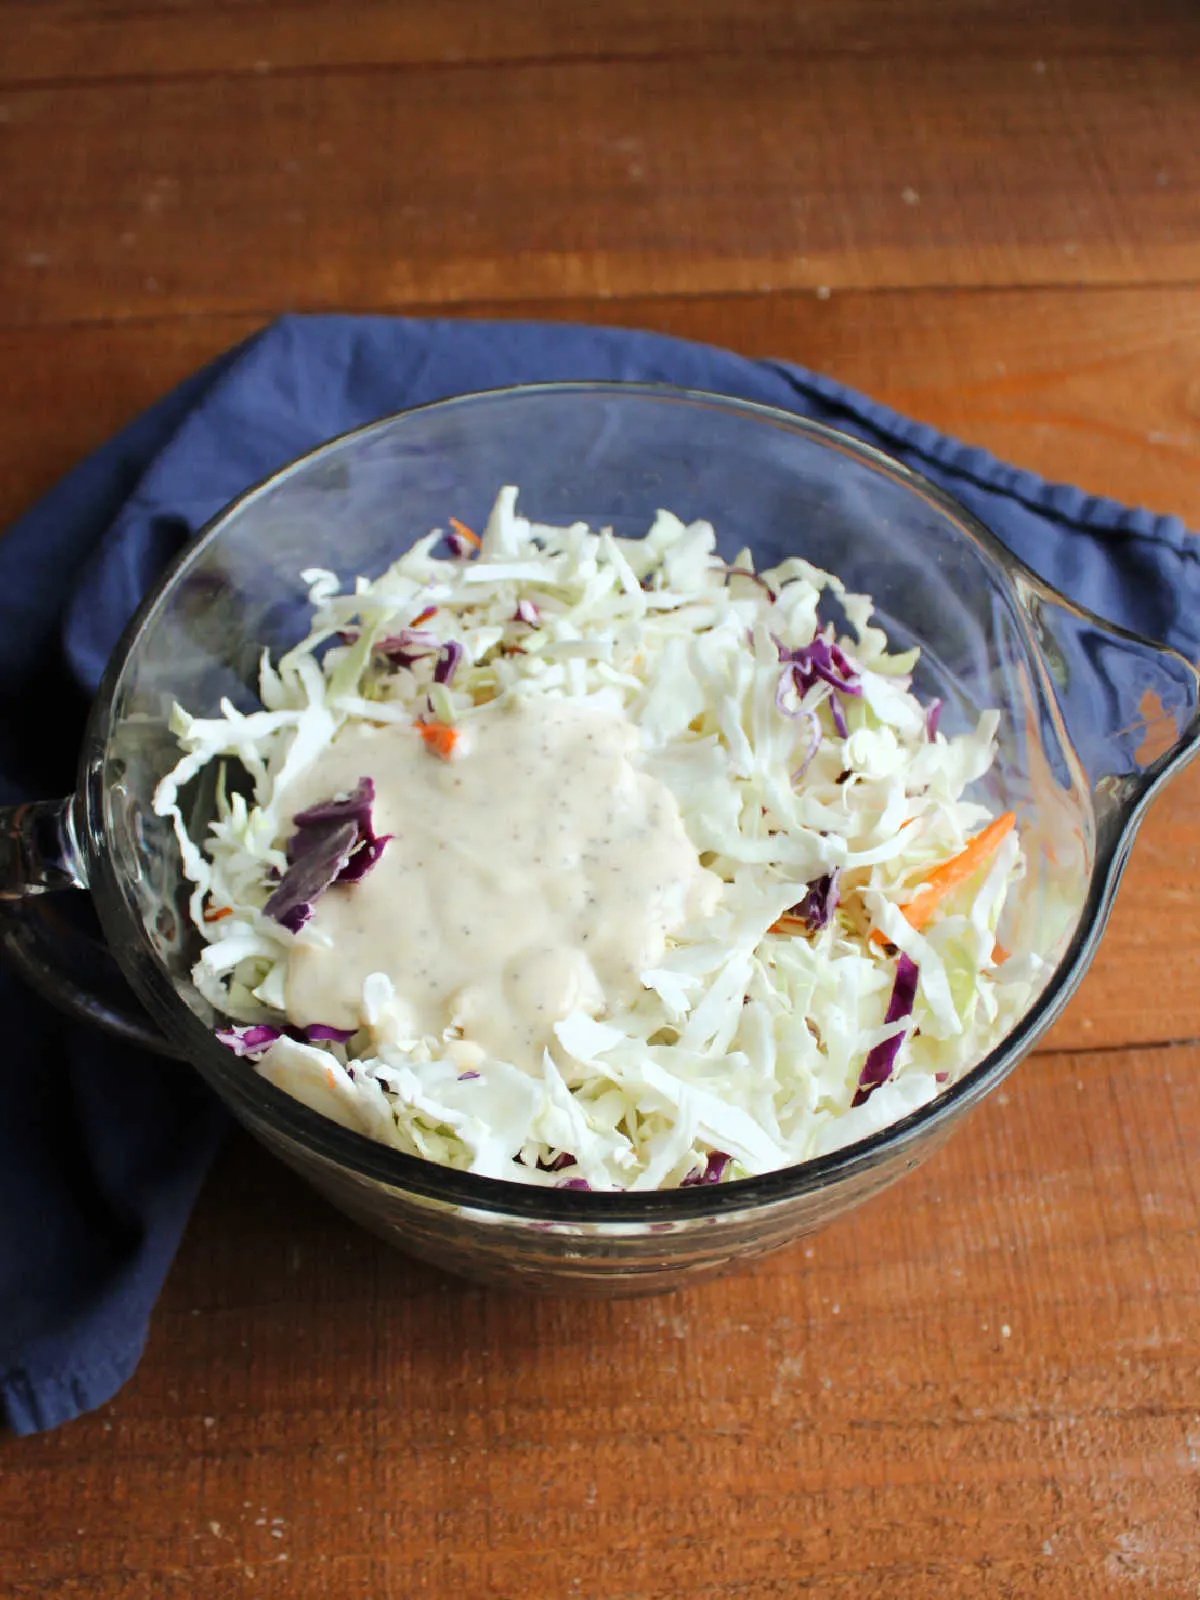 Small pool of creamy dressing on top of shredded cabbage in a glass bowl.